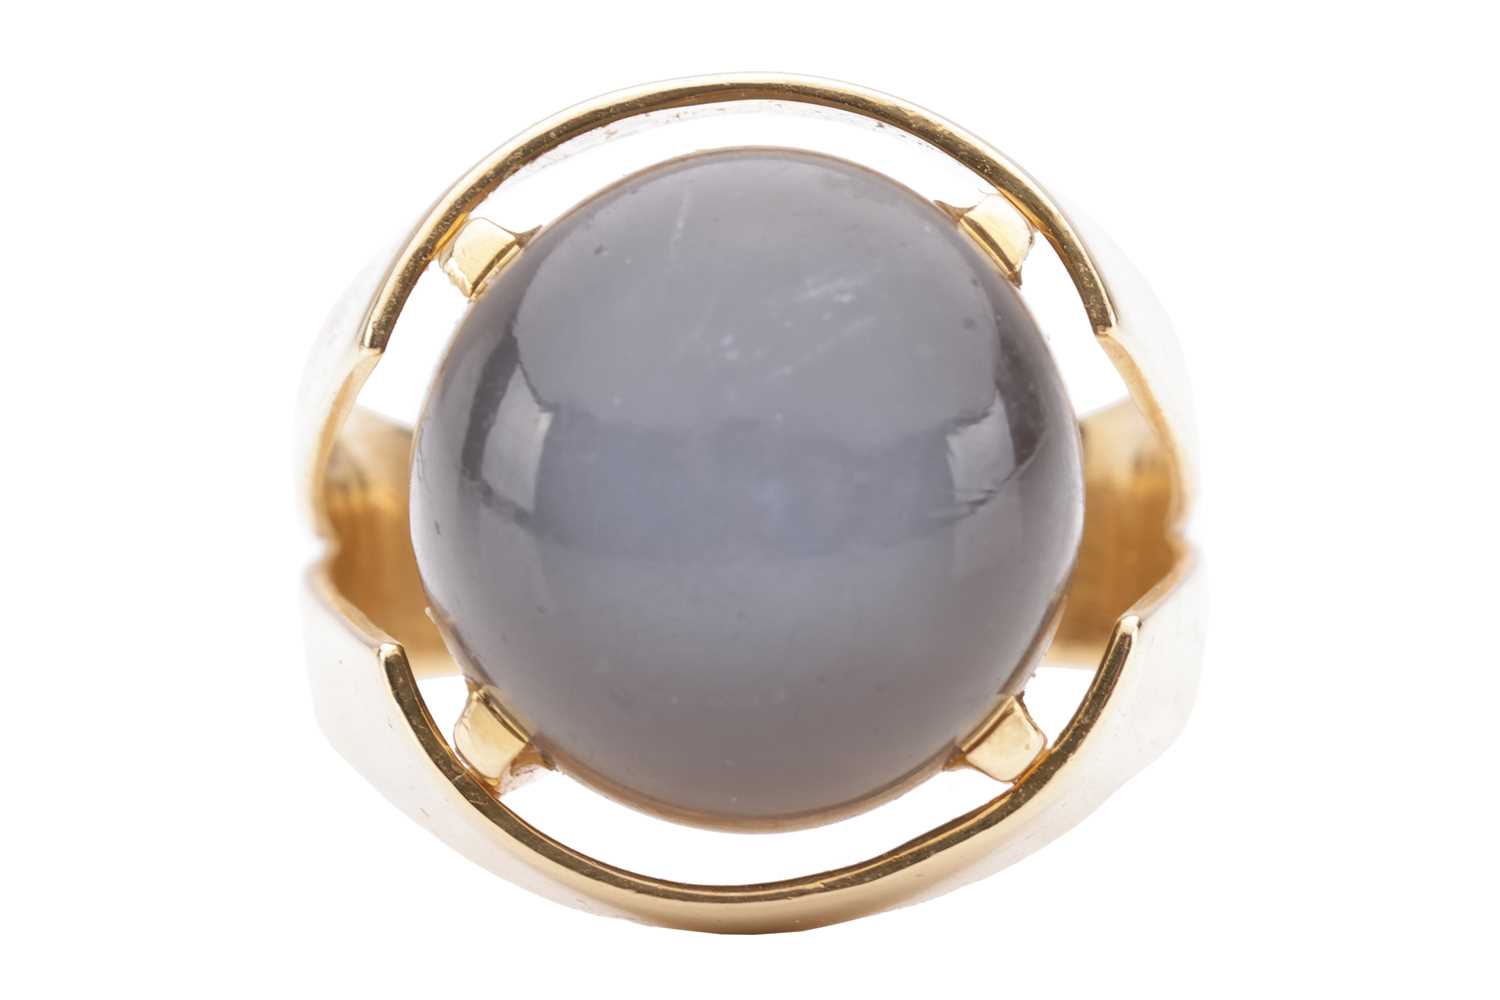 A grey moonstone cabochon cocktail ring, featuring a round moonstone cabochon of 13.5 x 13.5 x 9.0 m